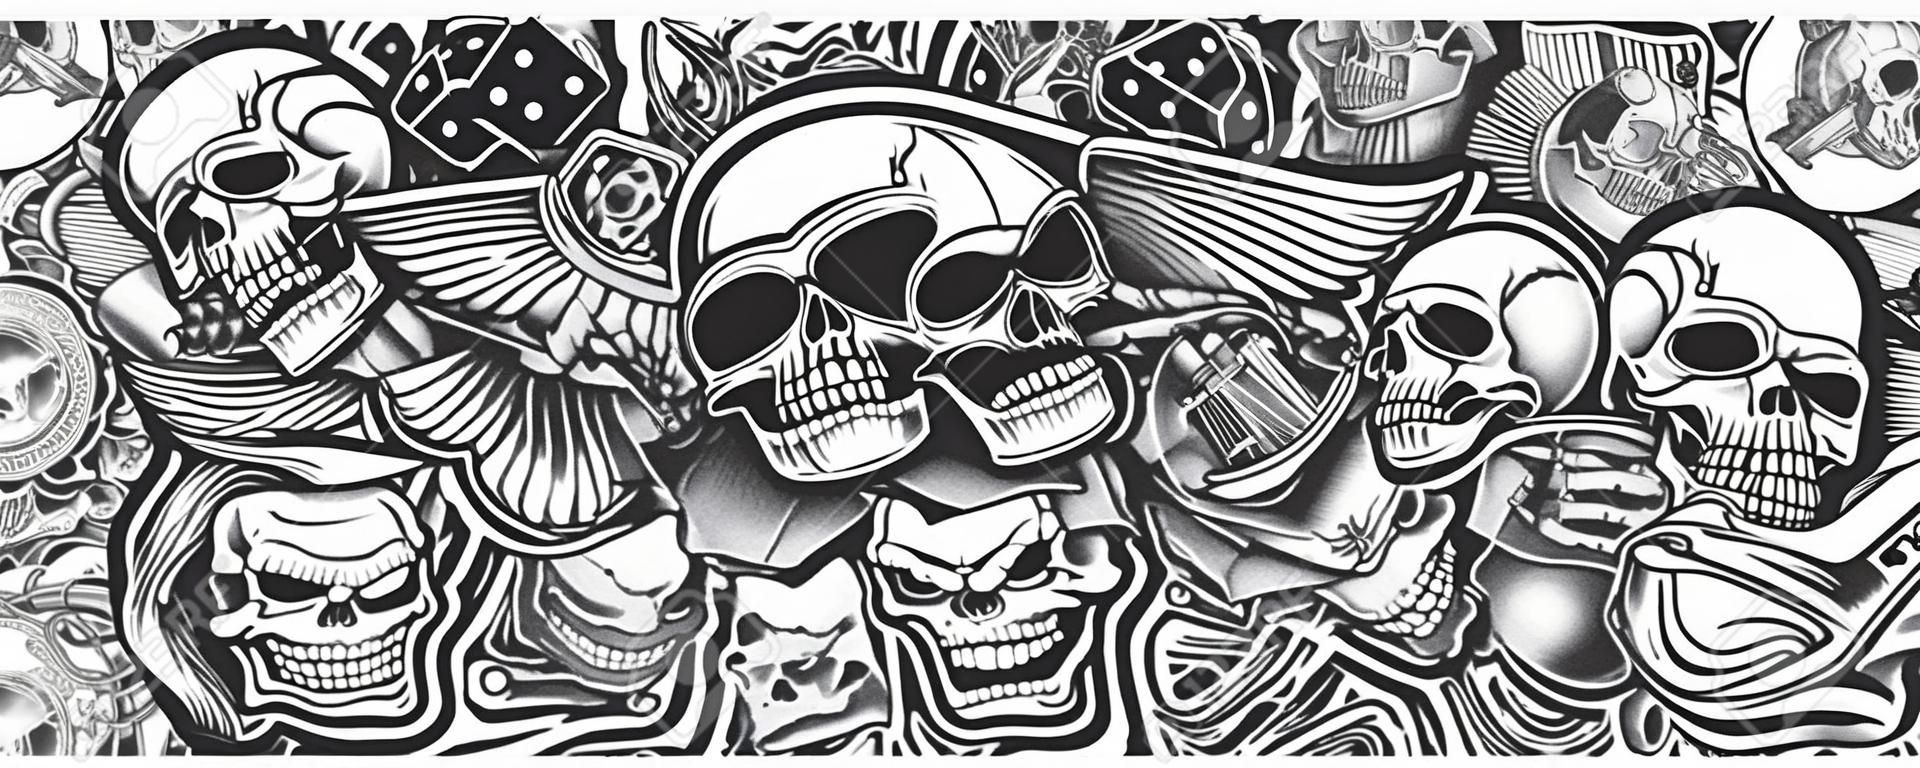 Seamless tattoo background with a skull, mask, tattoo machine, and other elements tattoo. Ideal for printing for fabric, wall decoration, and many other uses